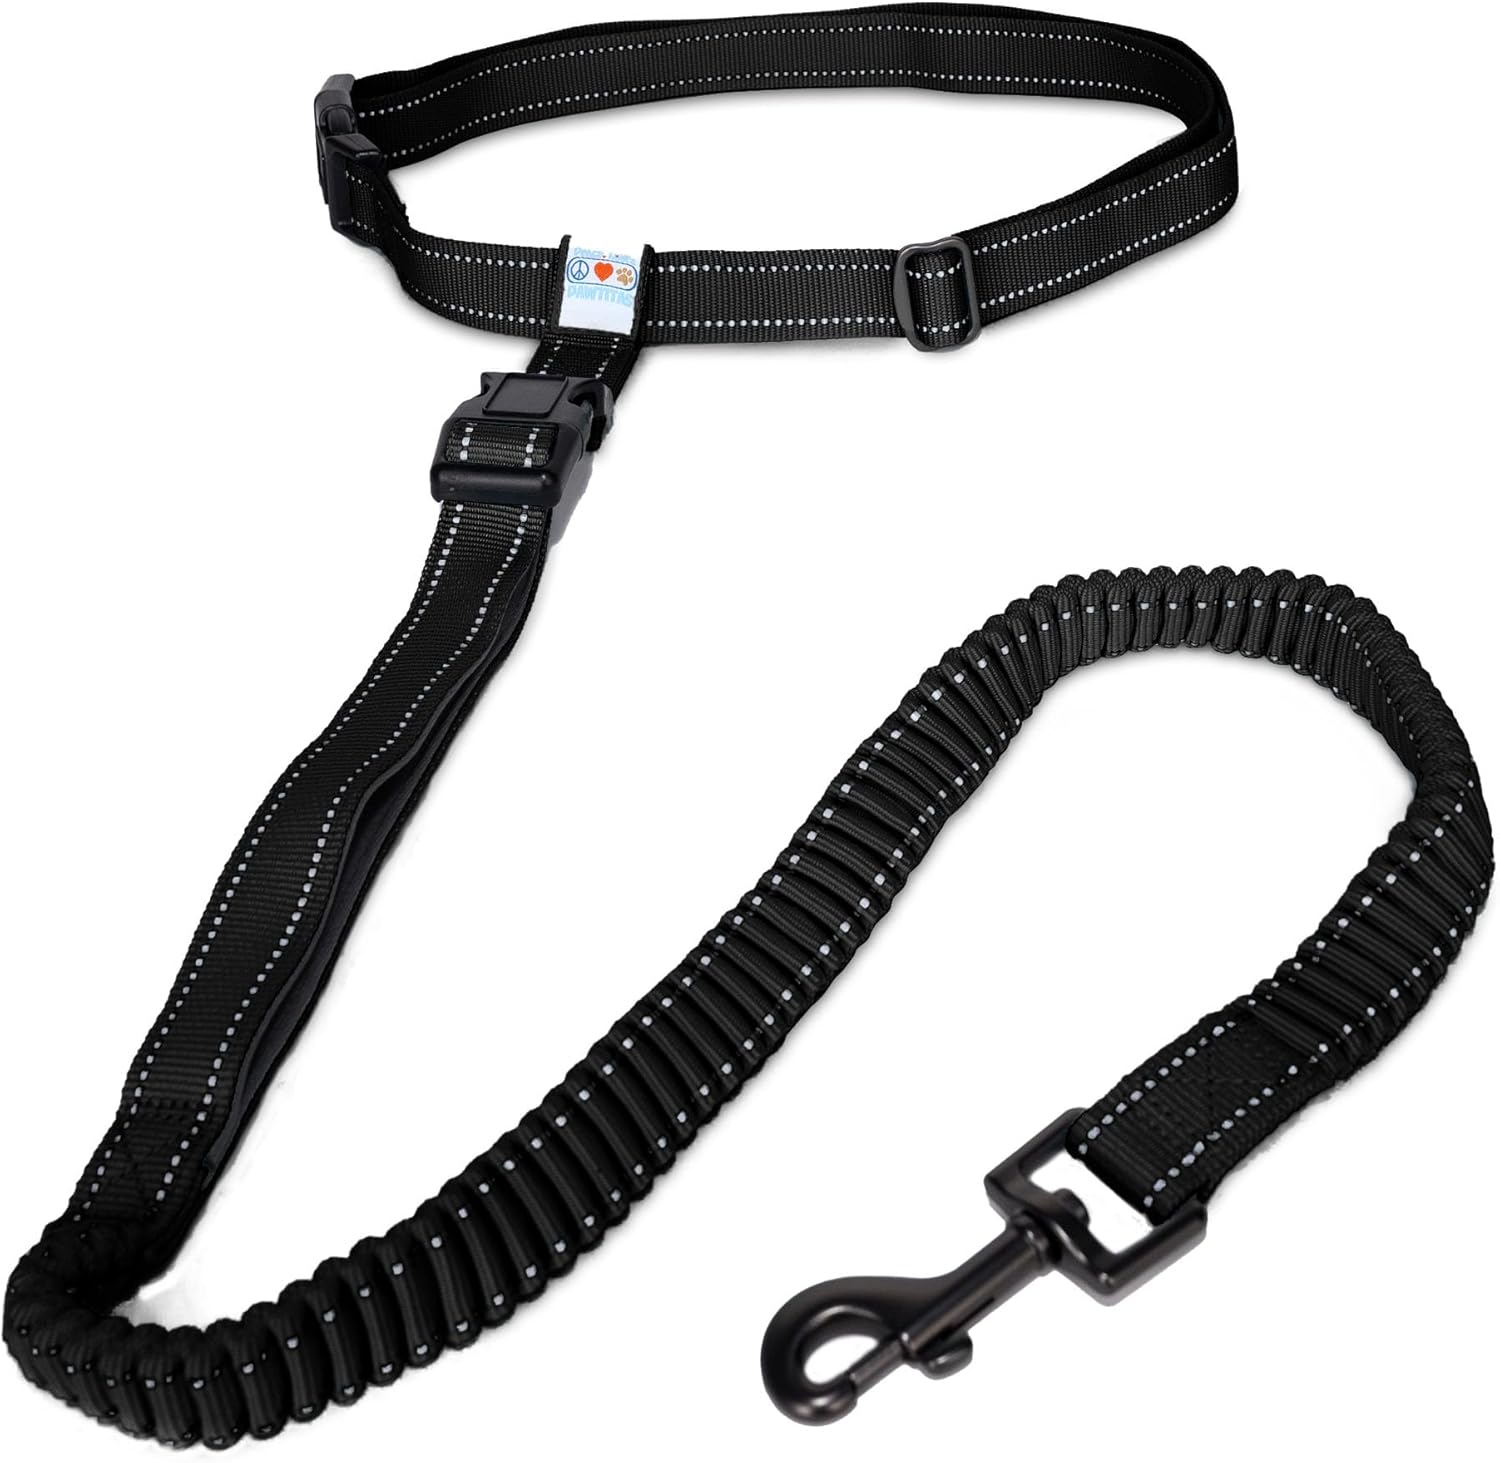 Pawtitas Hands Free Running Dog Lead | 1.8 M Reflective Dog Lead Comfortable Padded Handle | Puppy Dog Training Double Handle Reflective Lead | Reflective Short Dog Lead for Training - Black Lead